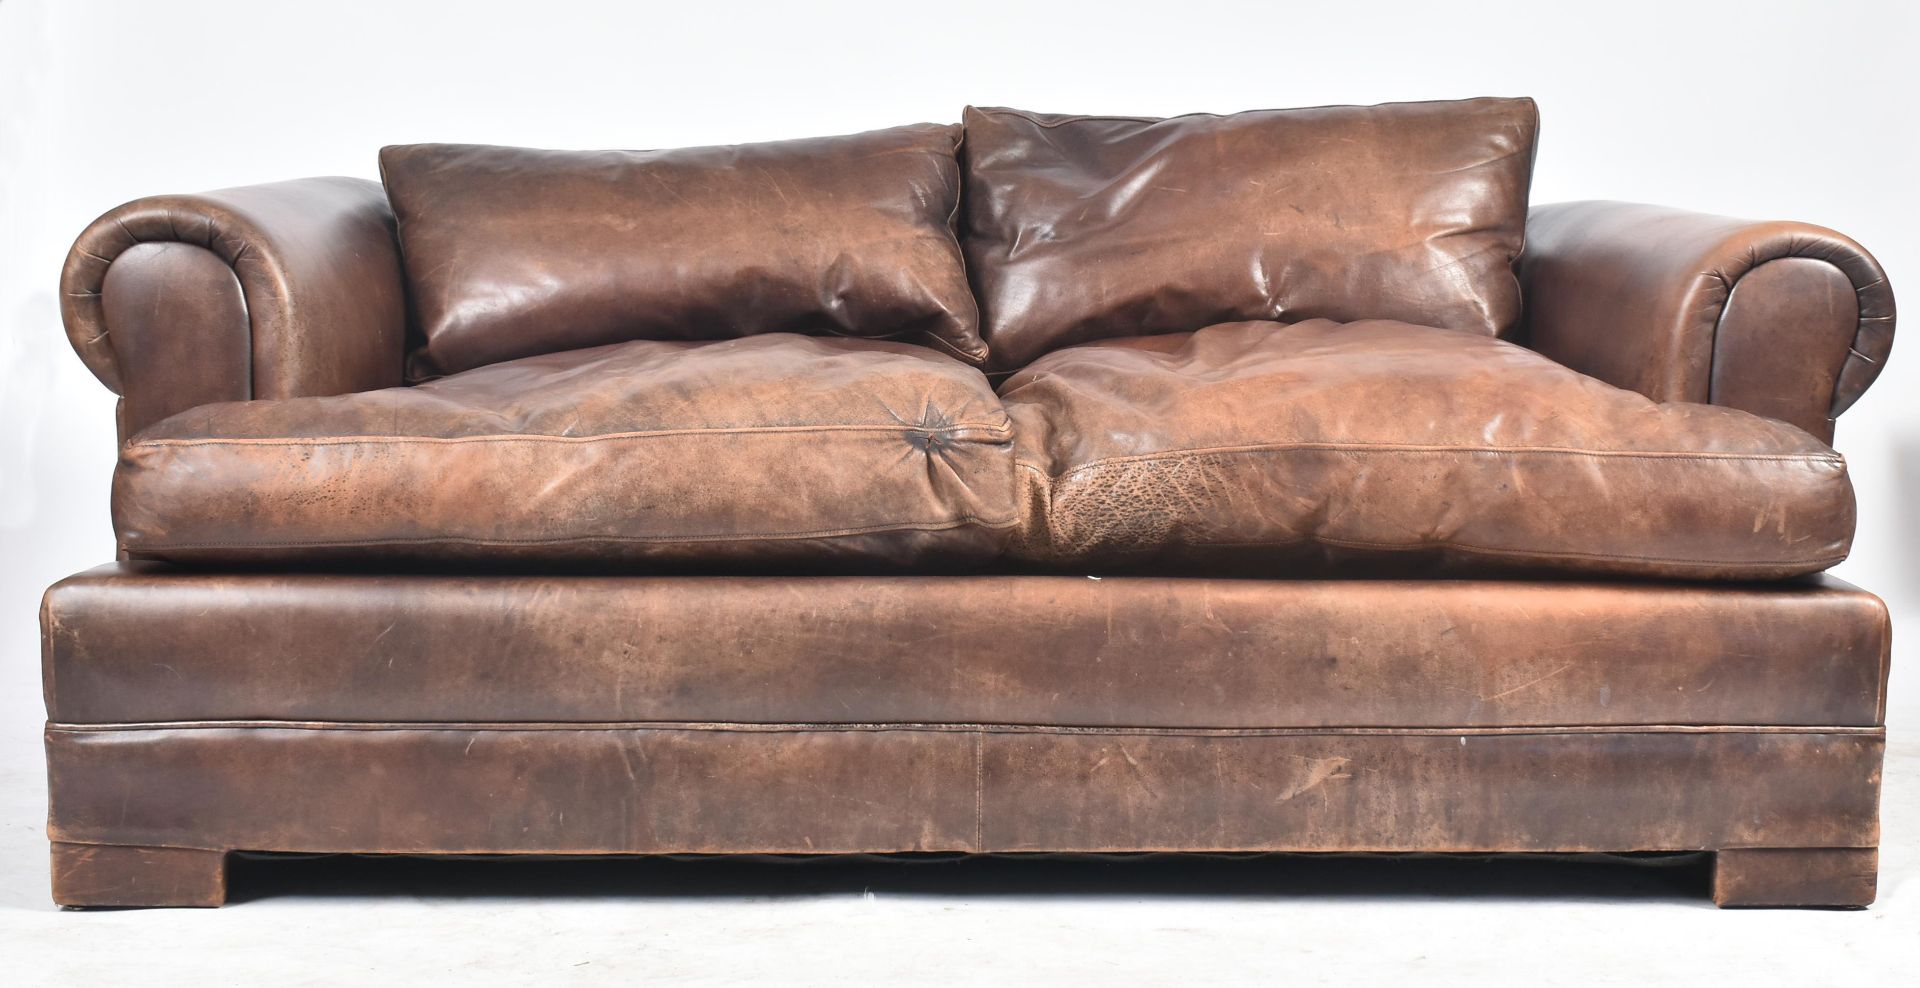 MODERN HIGH-END BRITISH DESIGN TWO SEATER LEATHER SOFA